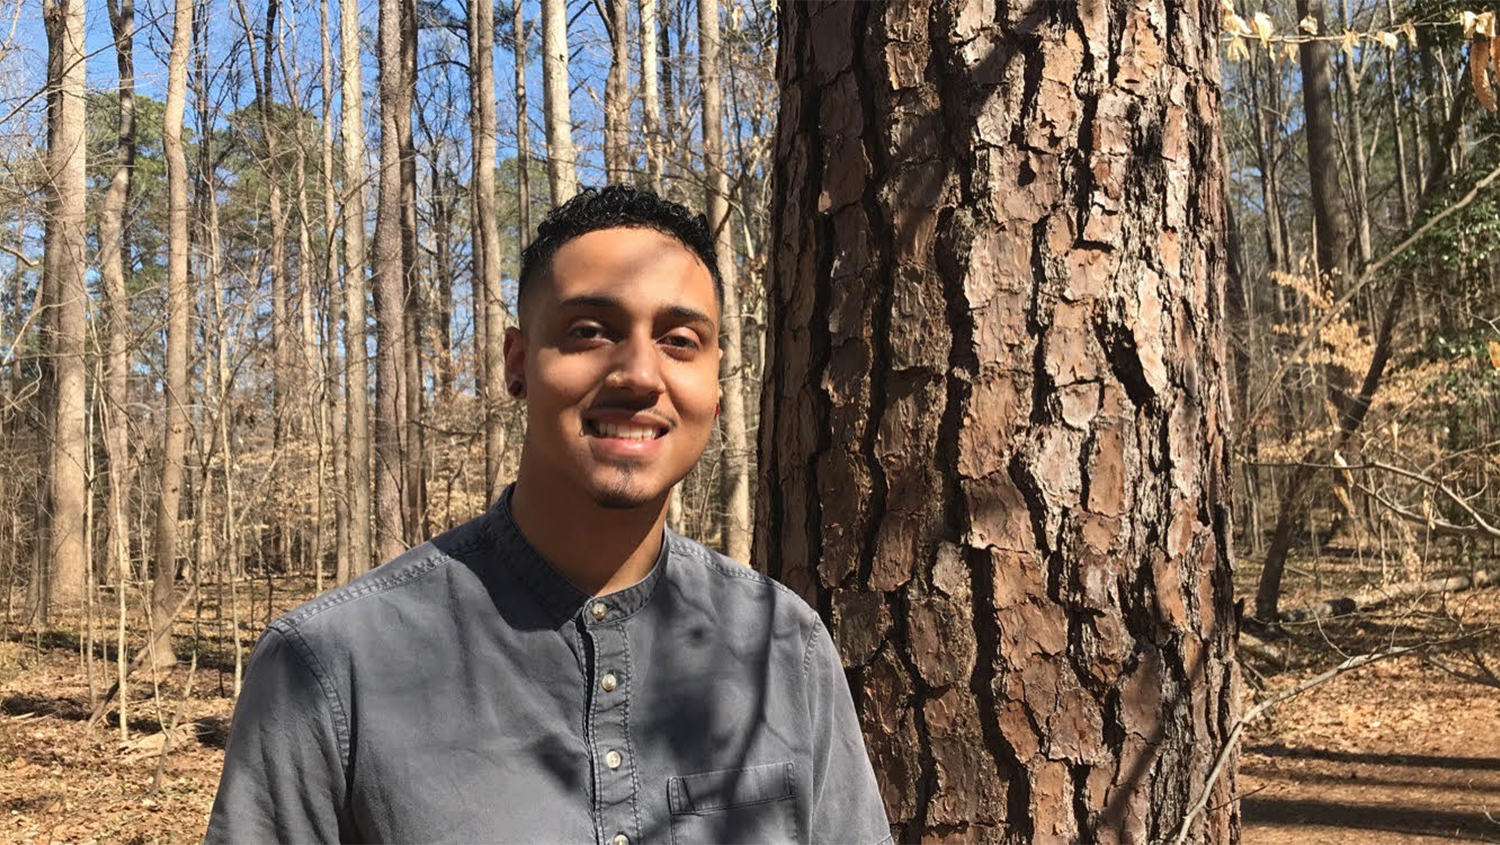 Norman poses and smiles in woods - Forestry Student Overcomes Challenges to Shine as Research Assistant - College of Natural Resources News NC State University